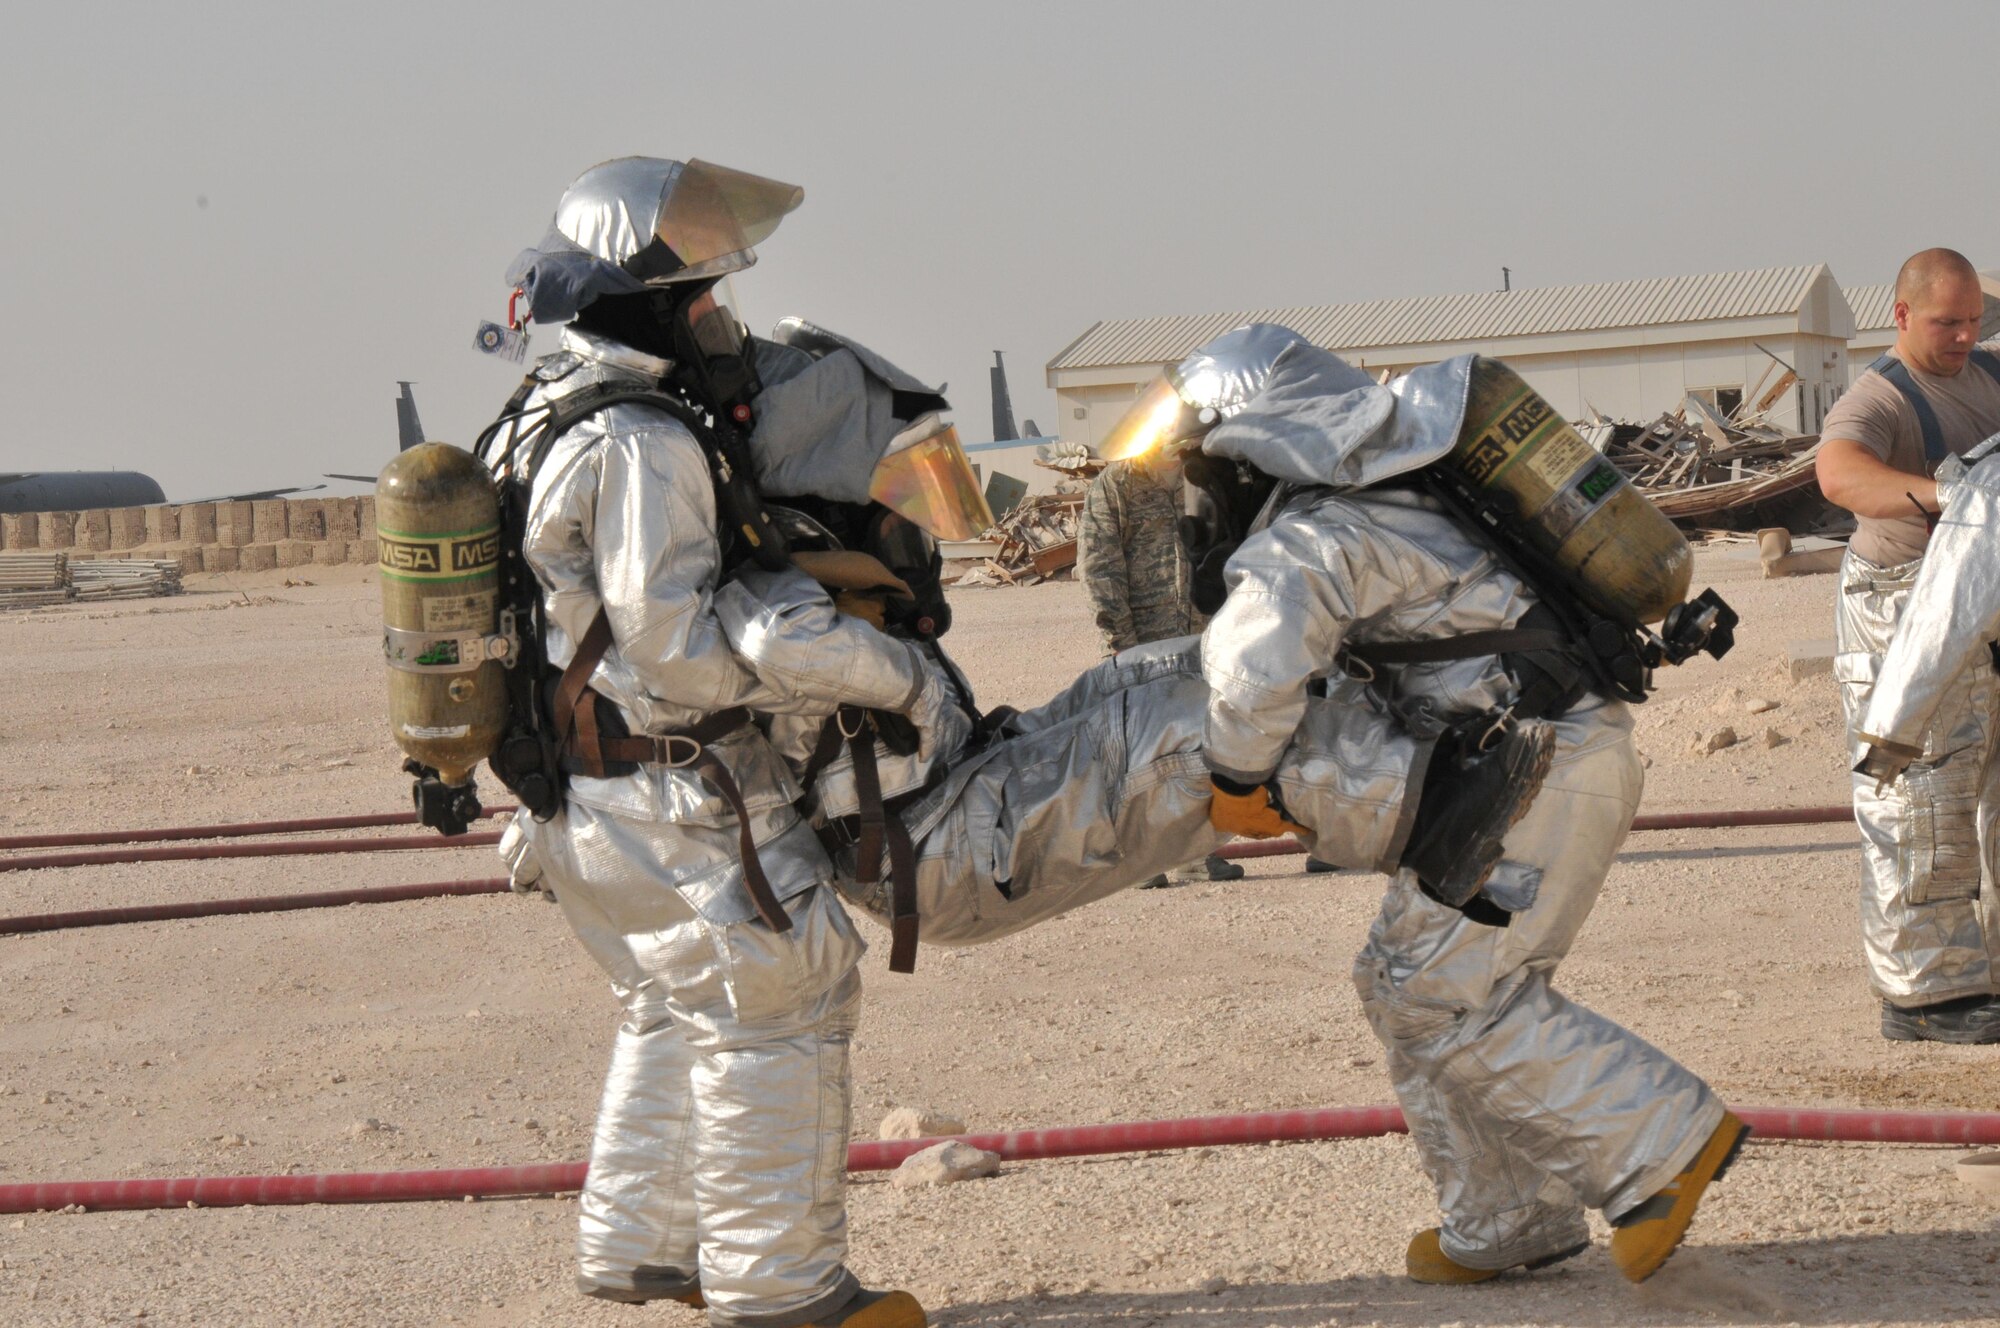 Two 379th Expeditionary Civil Engineer Squadron firefighters carry one of their fellow firefighters out of a simulated burning building during an interagency exercise in Al Udeid Air Base, Qatar Oct. 27. The injured firefighter stepped on a mock explosive device which required him to be rescued from the building. The interagency exercise featured professionals from three 379th Air Expeditionary Wing units including explosive ordnance technicians, security forces patrolmen and firefighters. (U.S. Air Force photo by Tech. Sgt. Terrica Y. Jones/Released)